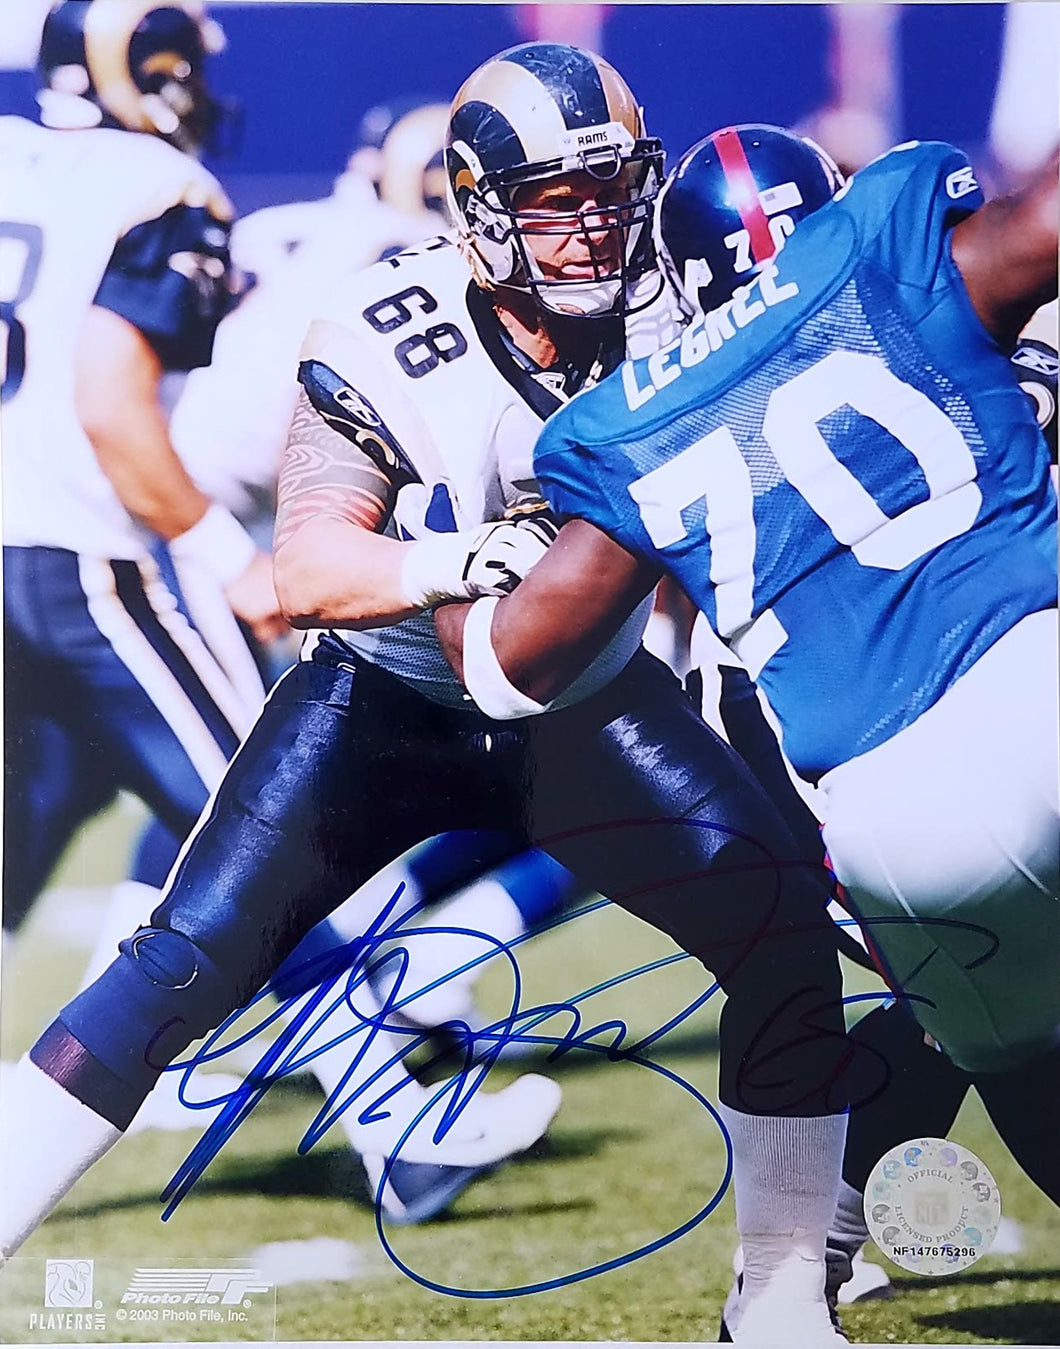 Kyle Turley  Signed Autographed 8x10